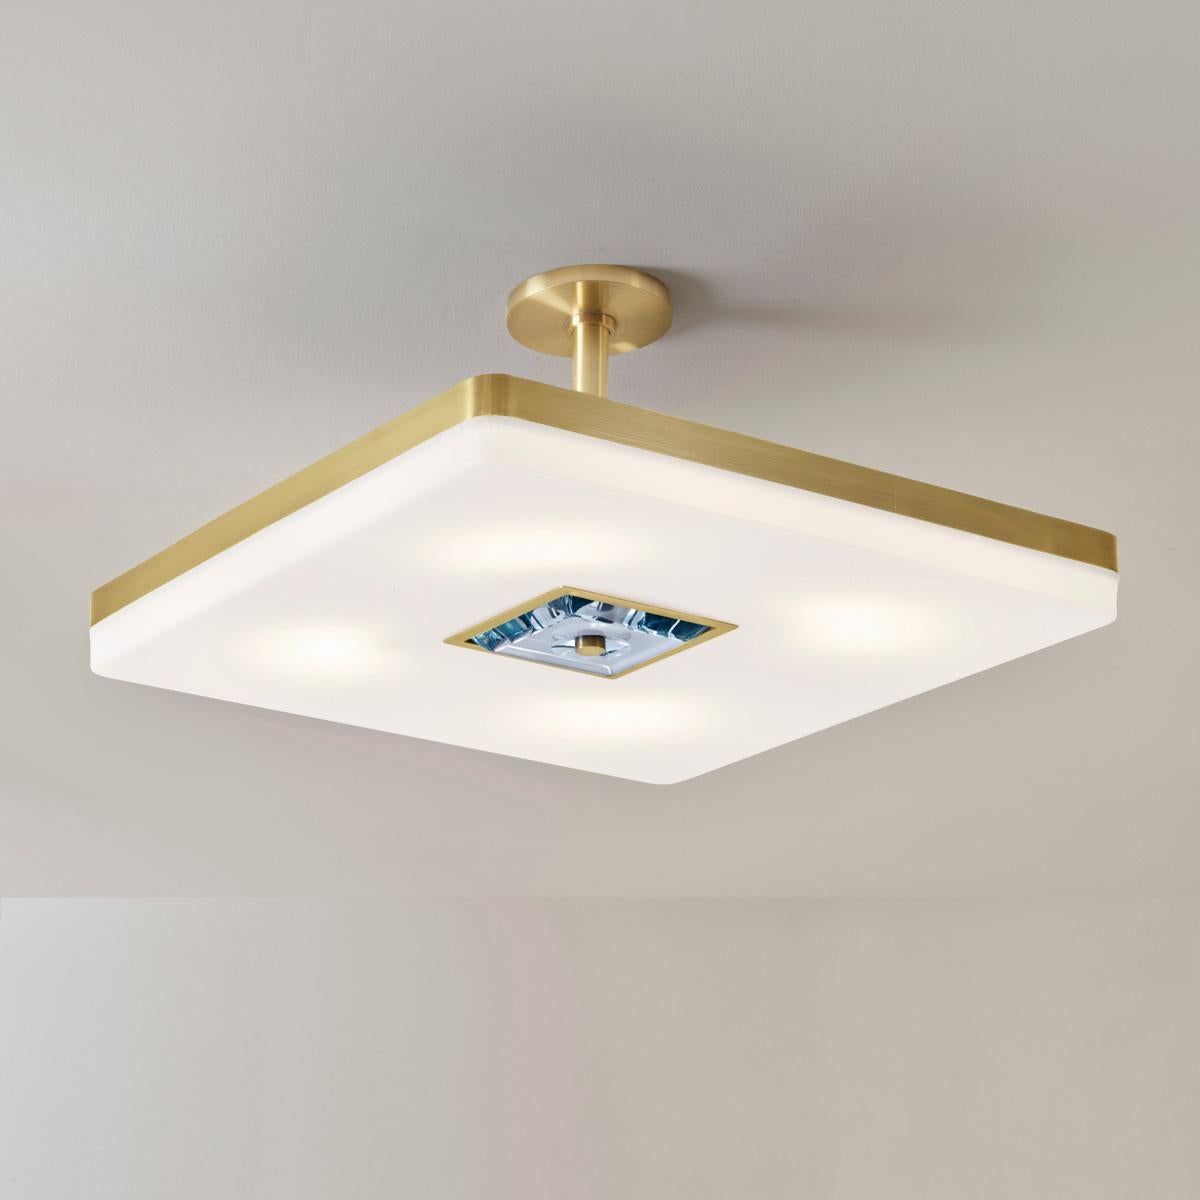 Iris Square Ceiling Light by Gaspare Asaro. Bronze Finish For Sale 1